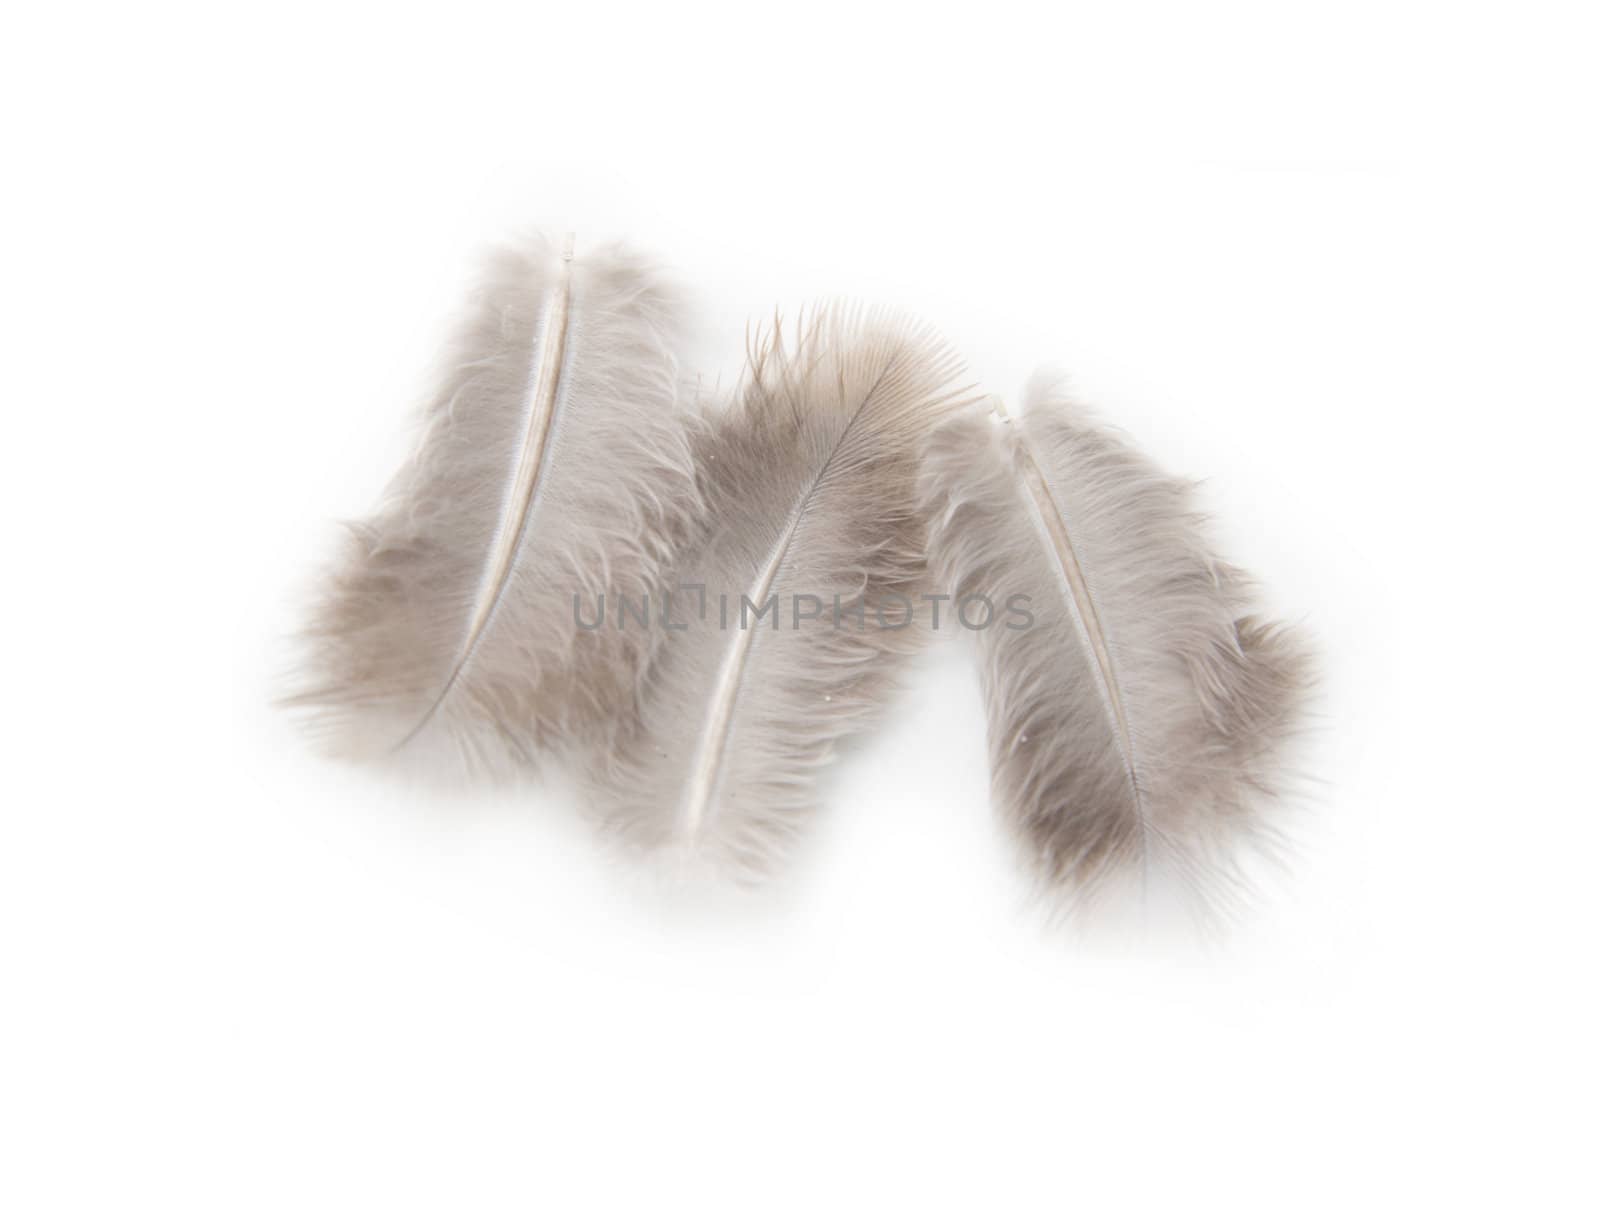 feathers on a white background by schankz